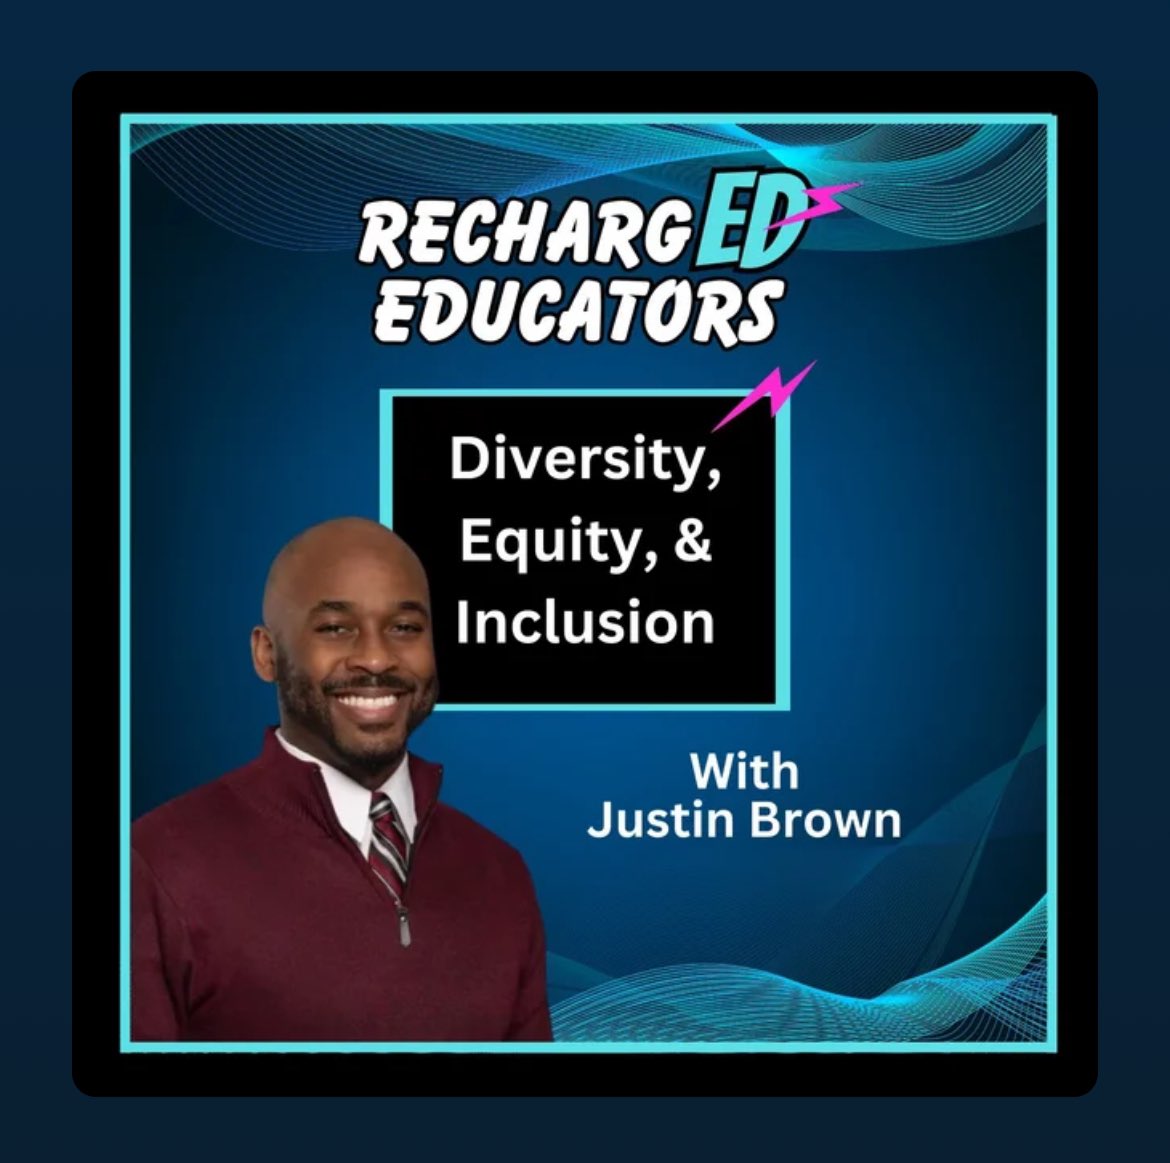 Loved this conversation with Justin Brown who’s doing innovative things with diversity, equity and inclusion initiatives. Listen on the RechargED Educators podcast here or your favorite platform! open.spotify.com/episode/519o4F… @StetsonAssoc @teachbetterteam